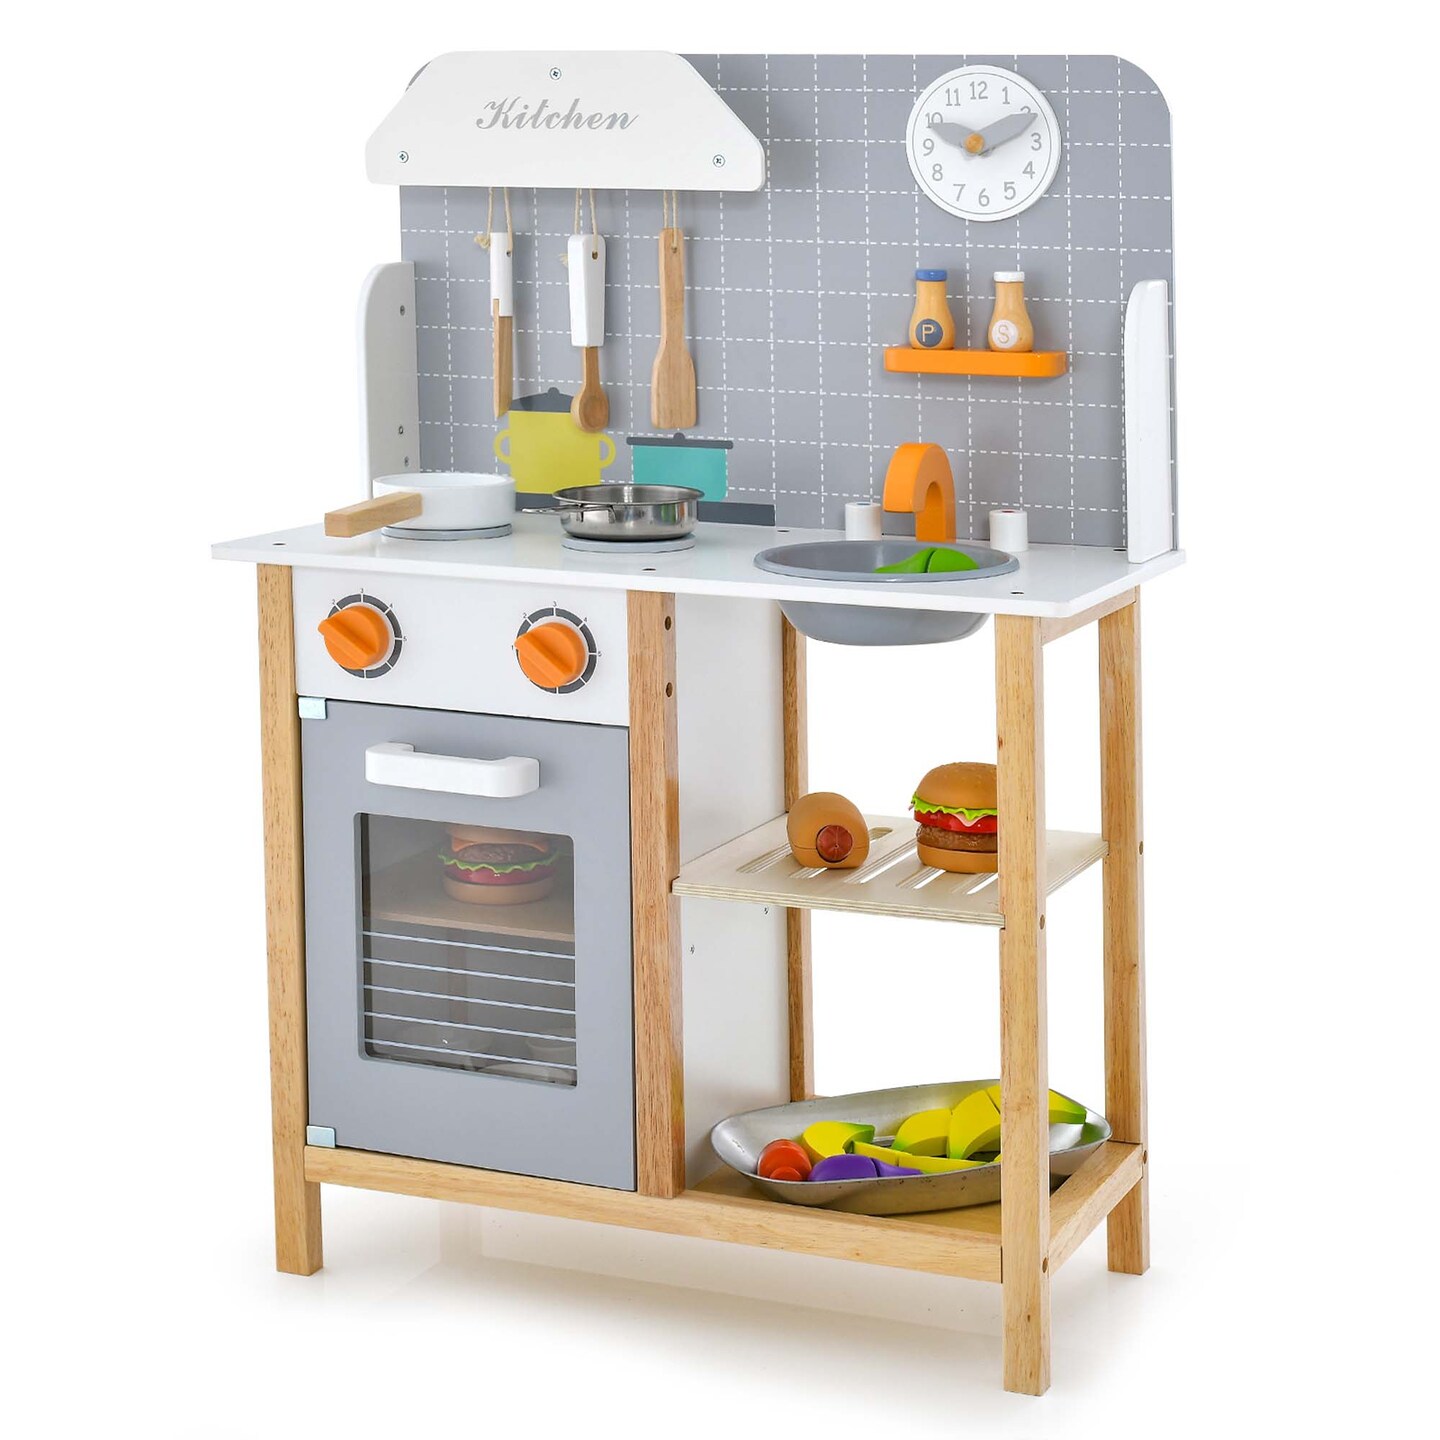 Costway Wooden Kid&#x27;s Play Kitchen Set Pretend Chef Cooking Toy with Cookware Accessories